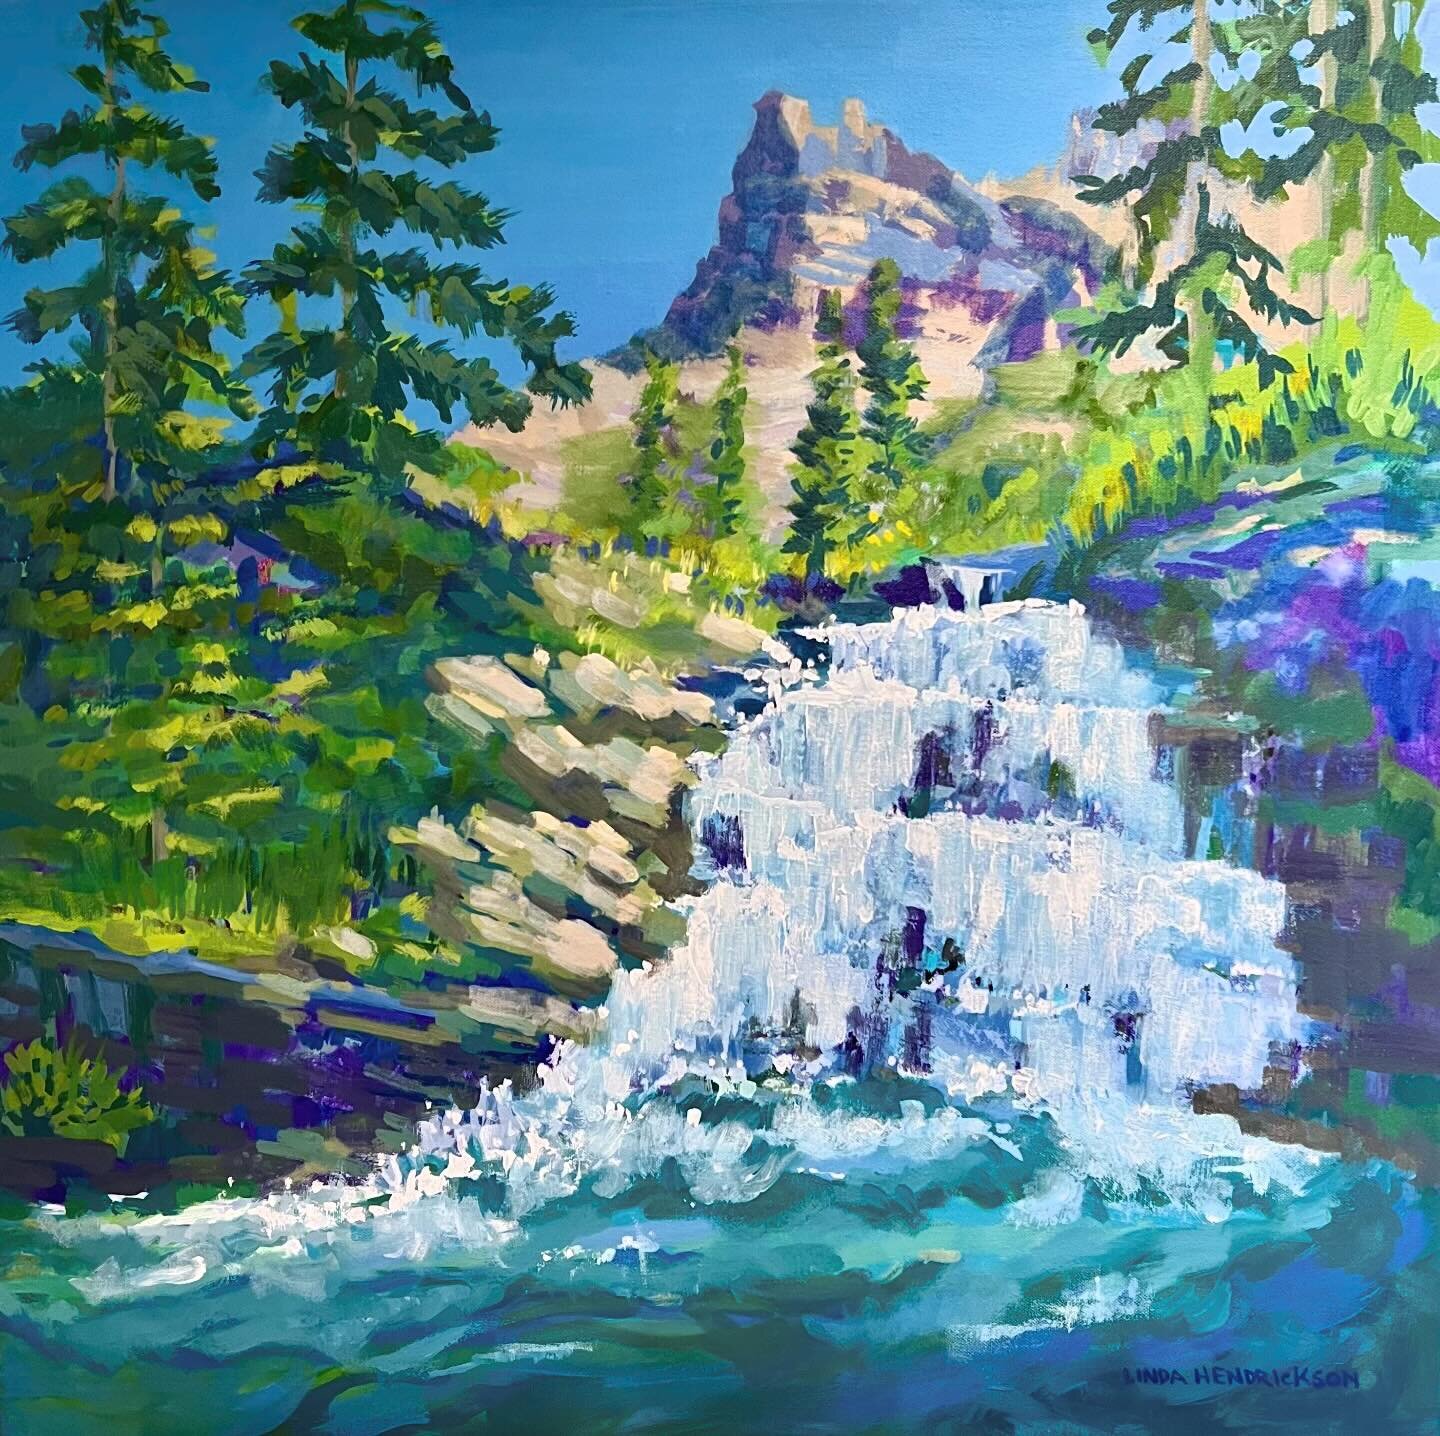 &ldquo;Mountain Cadence&rdquo;  24&rdquo;x 24&rdquo; available. Hot summer hikes are always more refreshing when one can hear an amazing tumble of water coming down the mountain near the trail.  This shady spot had it all, the view and the roar of wa